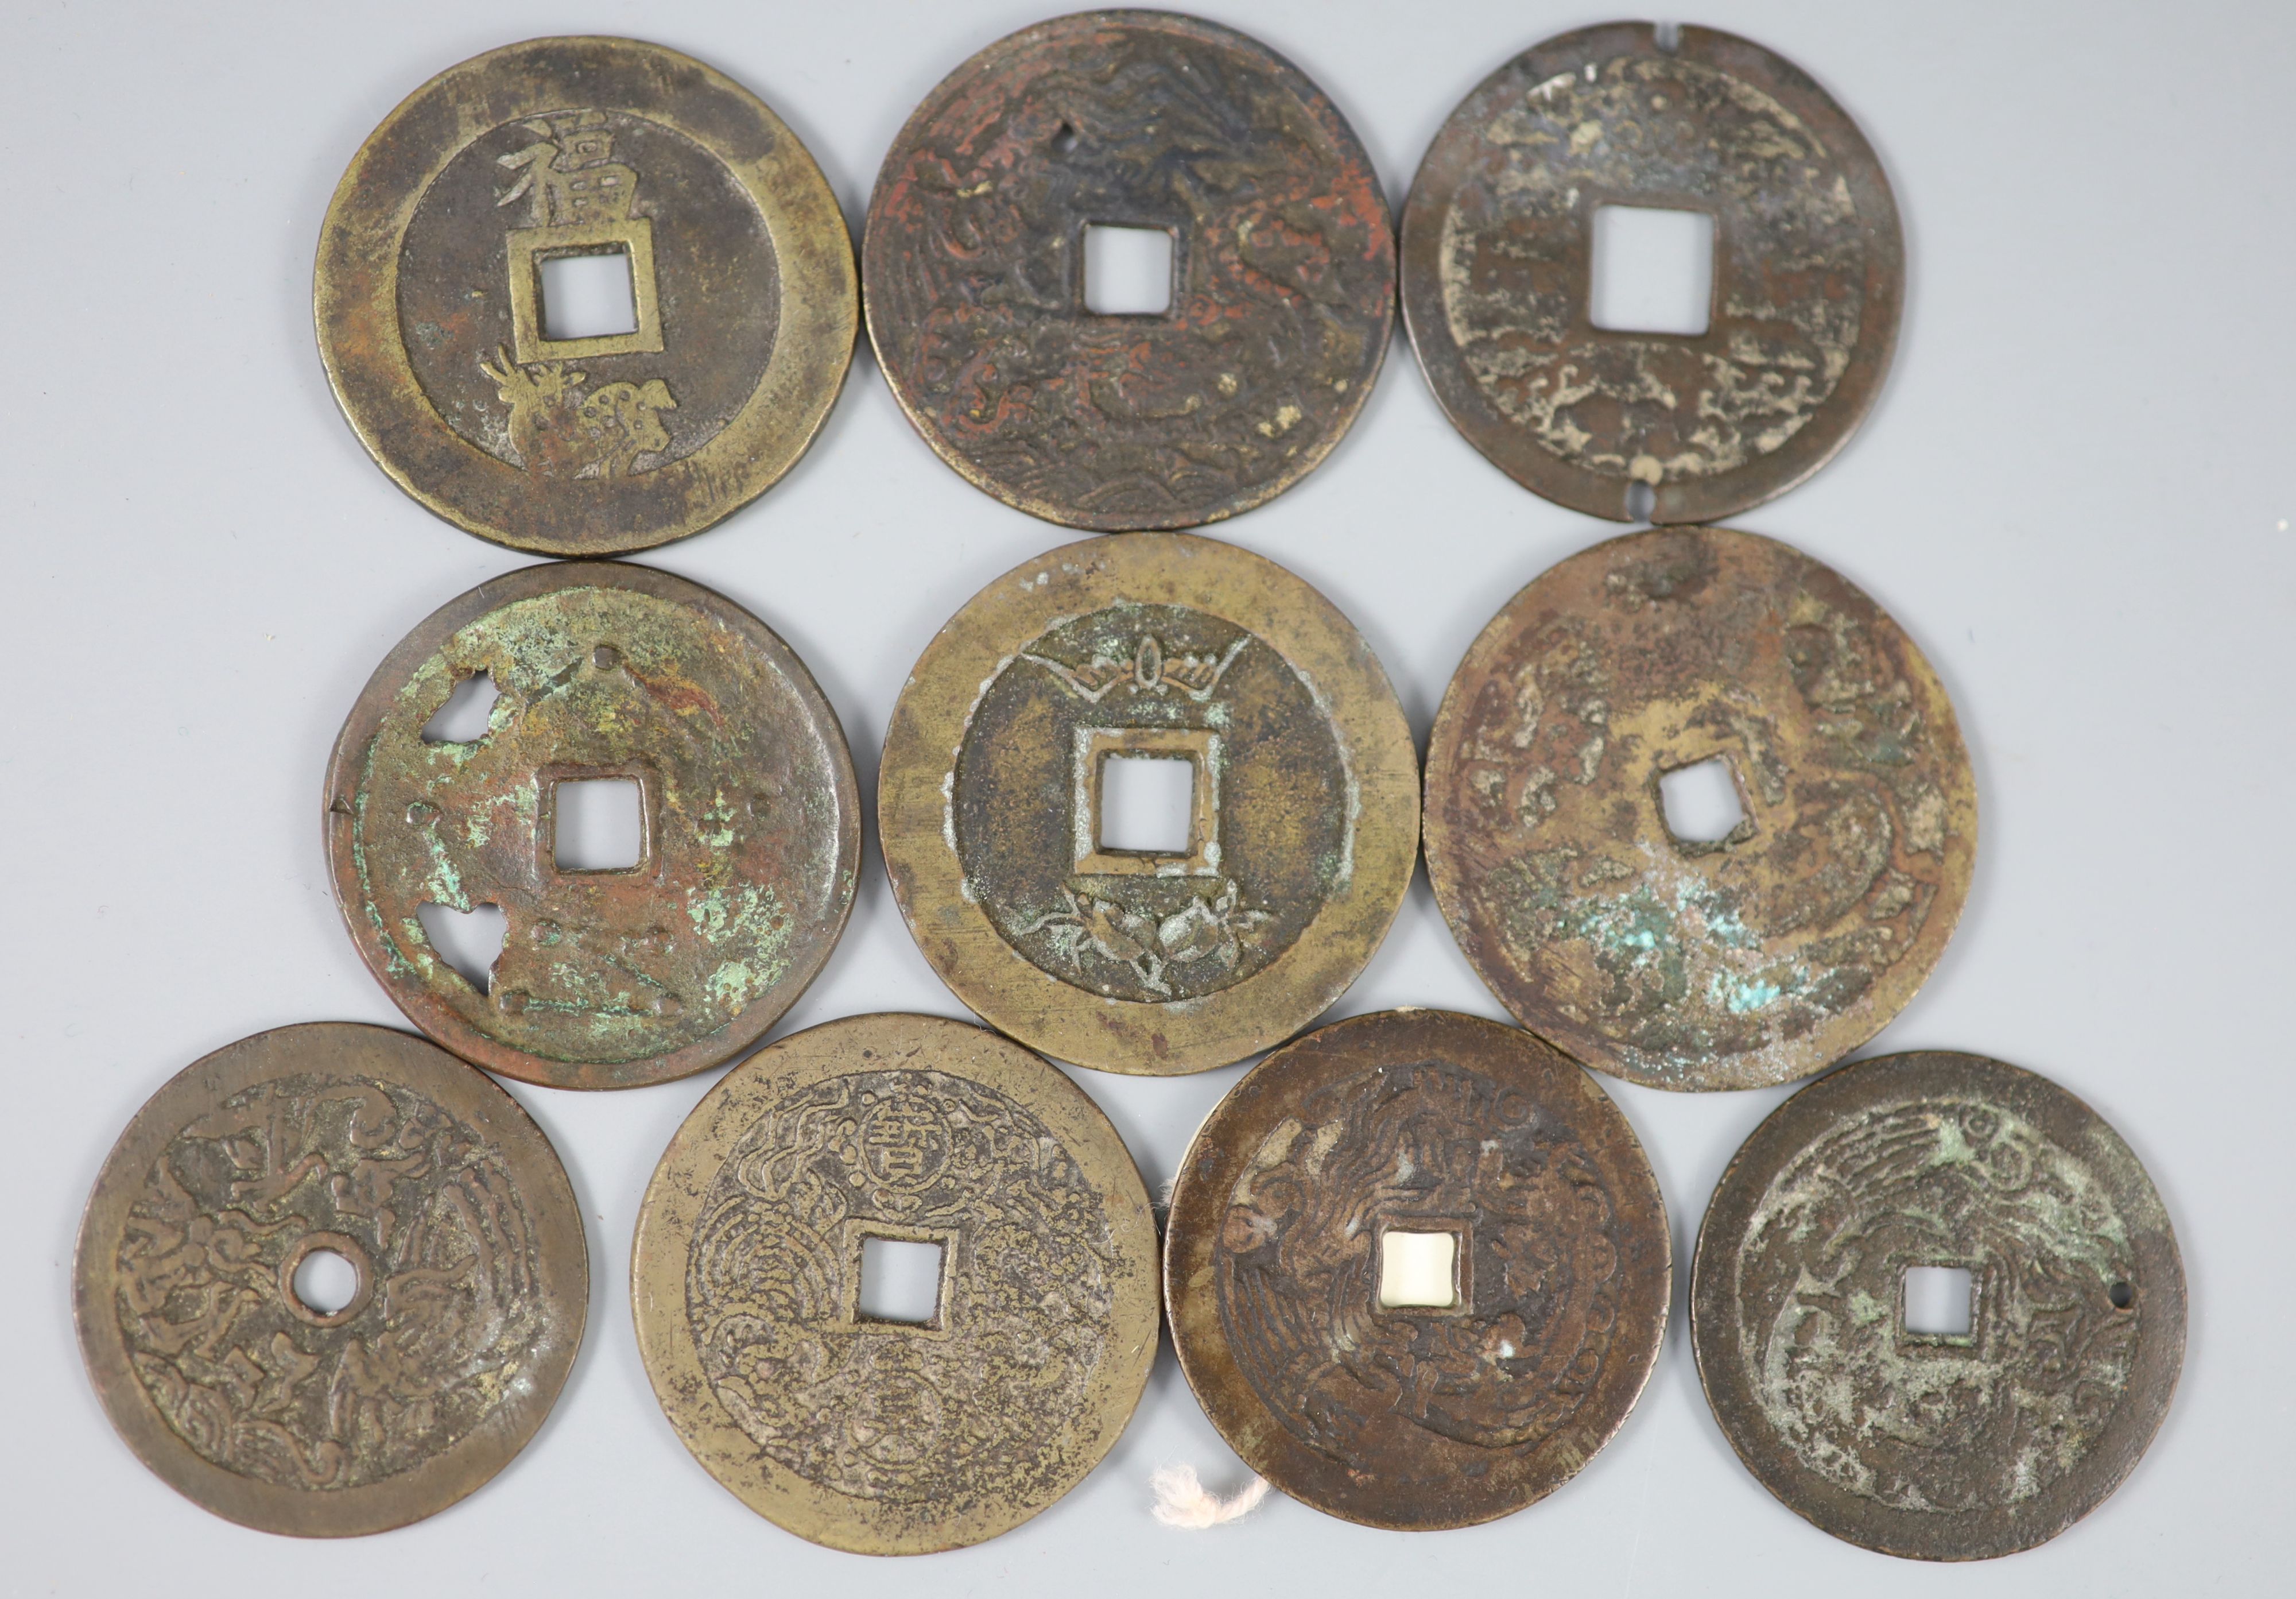 China, 10 bronze or copper charms or amulets, Qing dynasty,